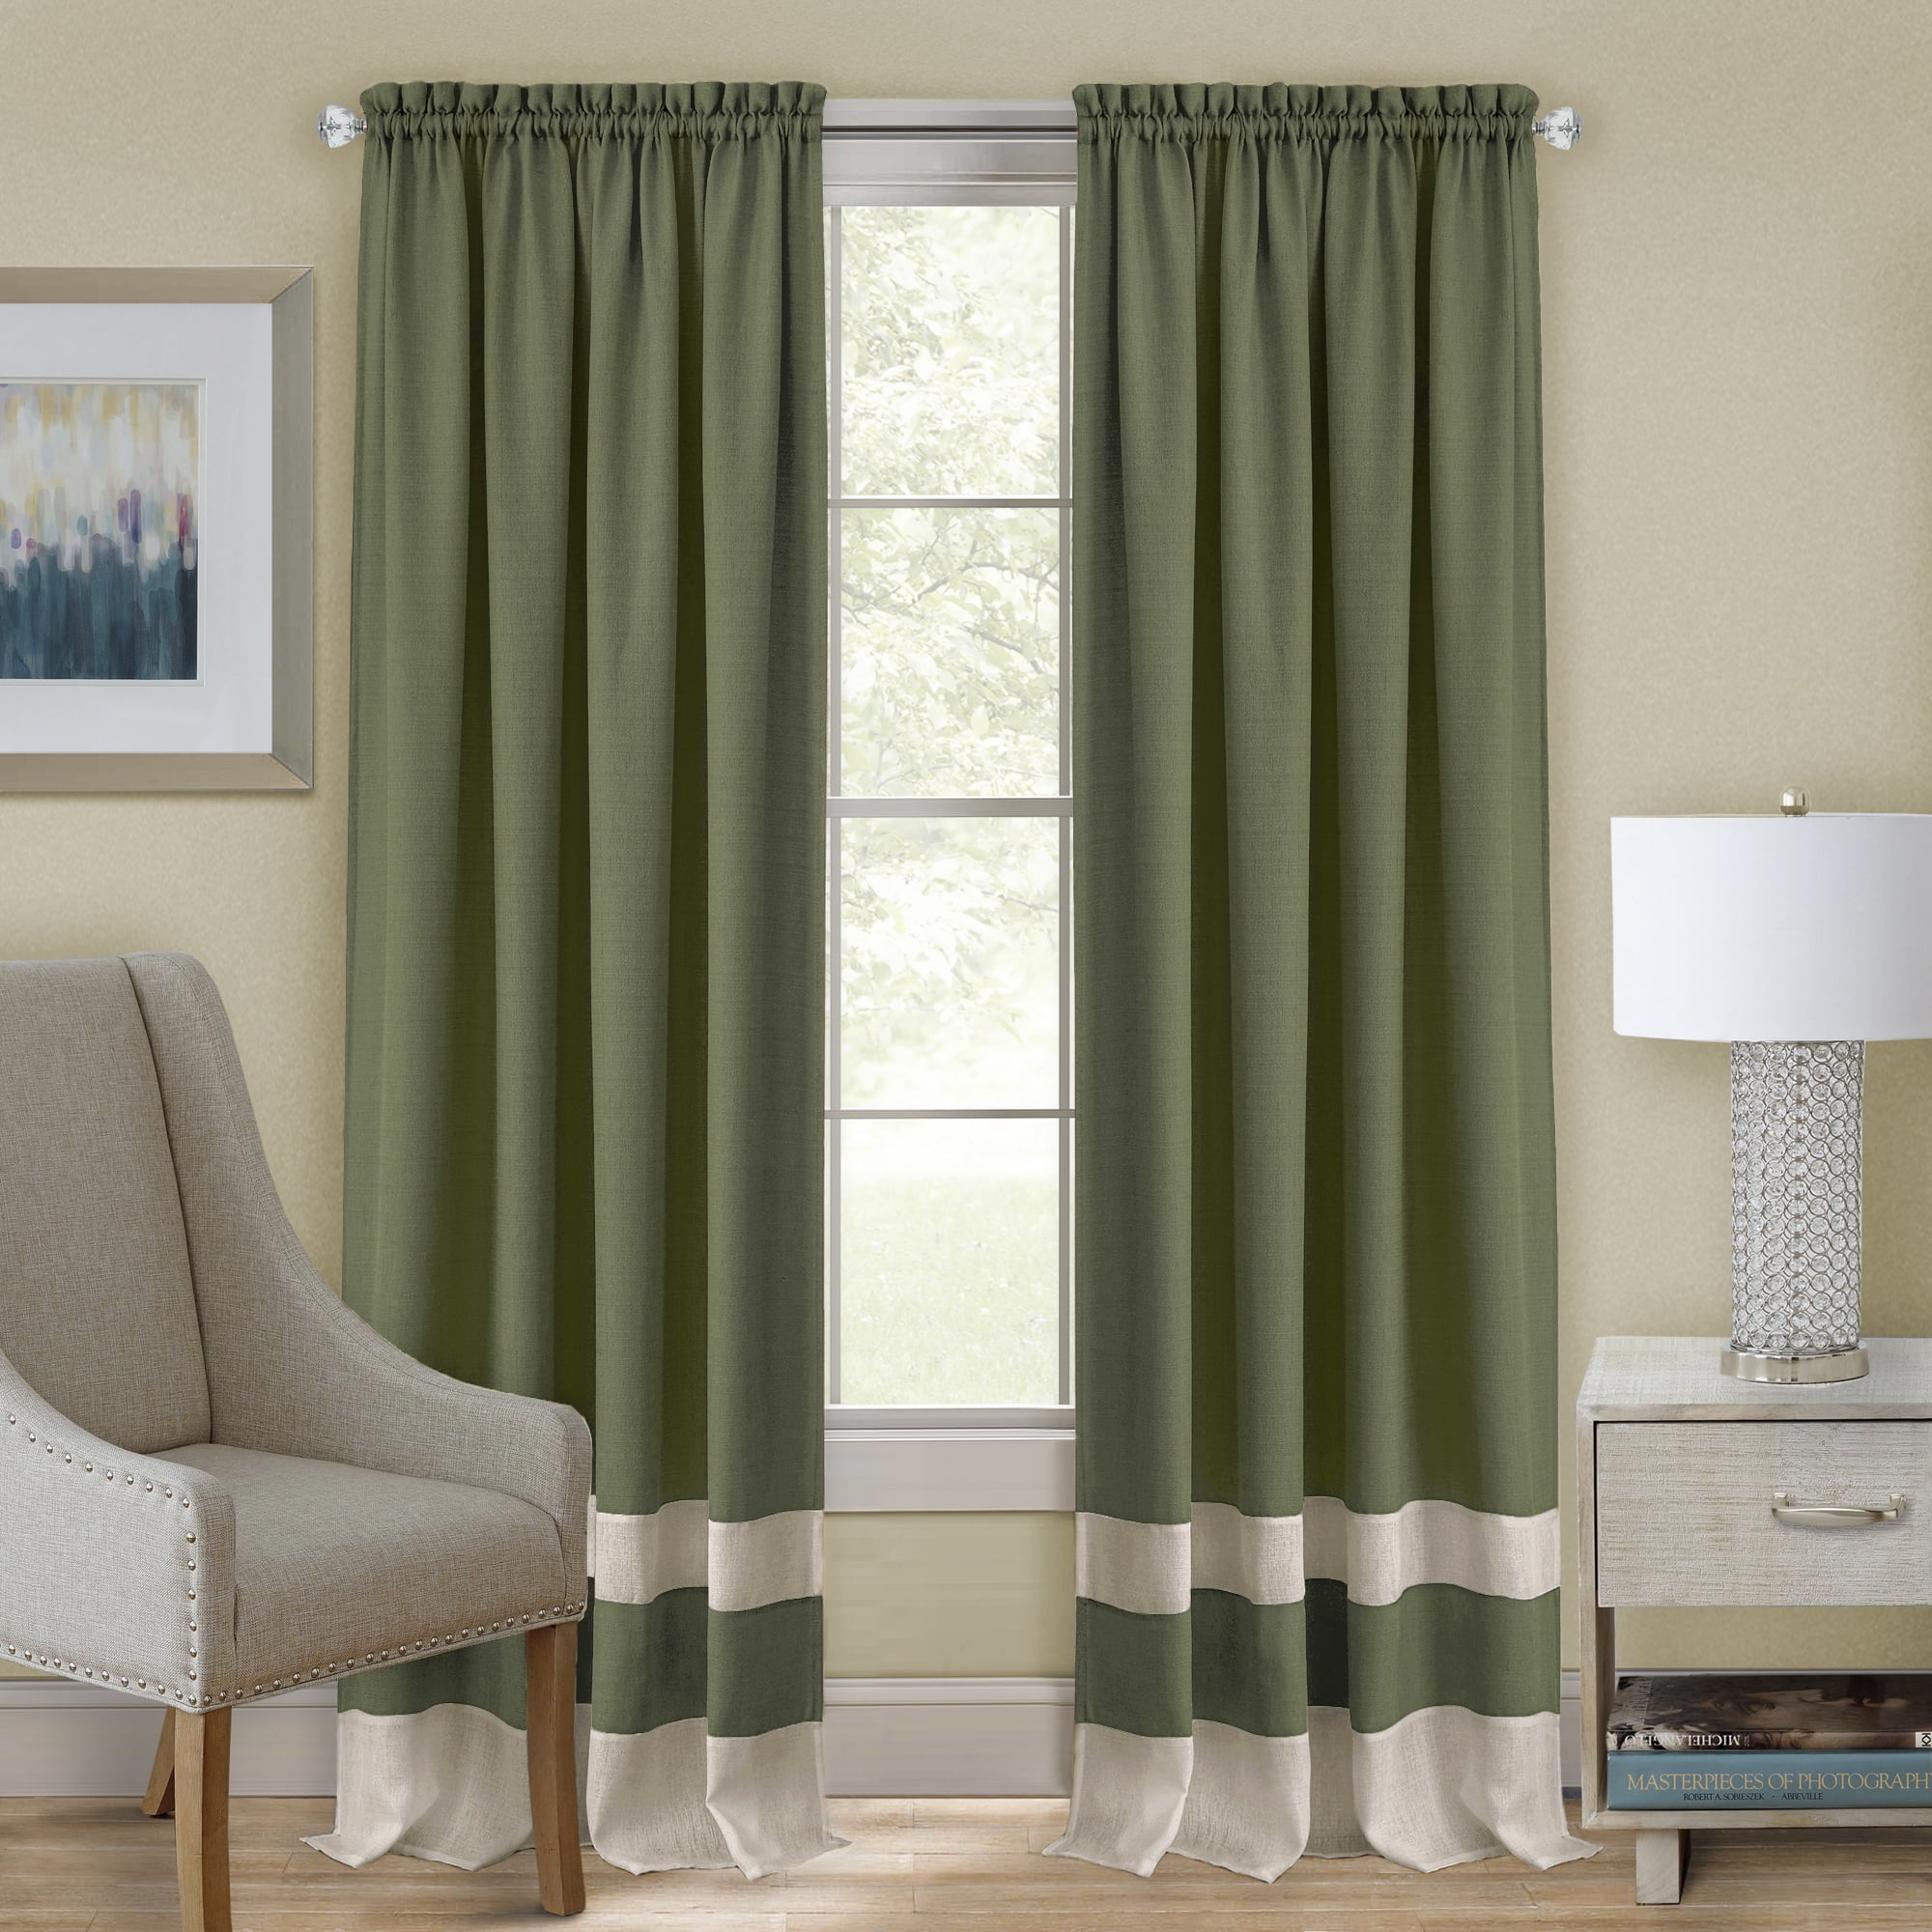 Picture of Achim DRPN84GC06 52 x 84 in. Darcy Rod Pocket Window Curtain Panel - Green & Camel